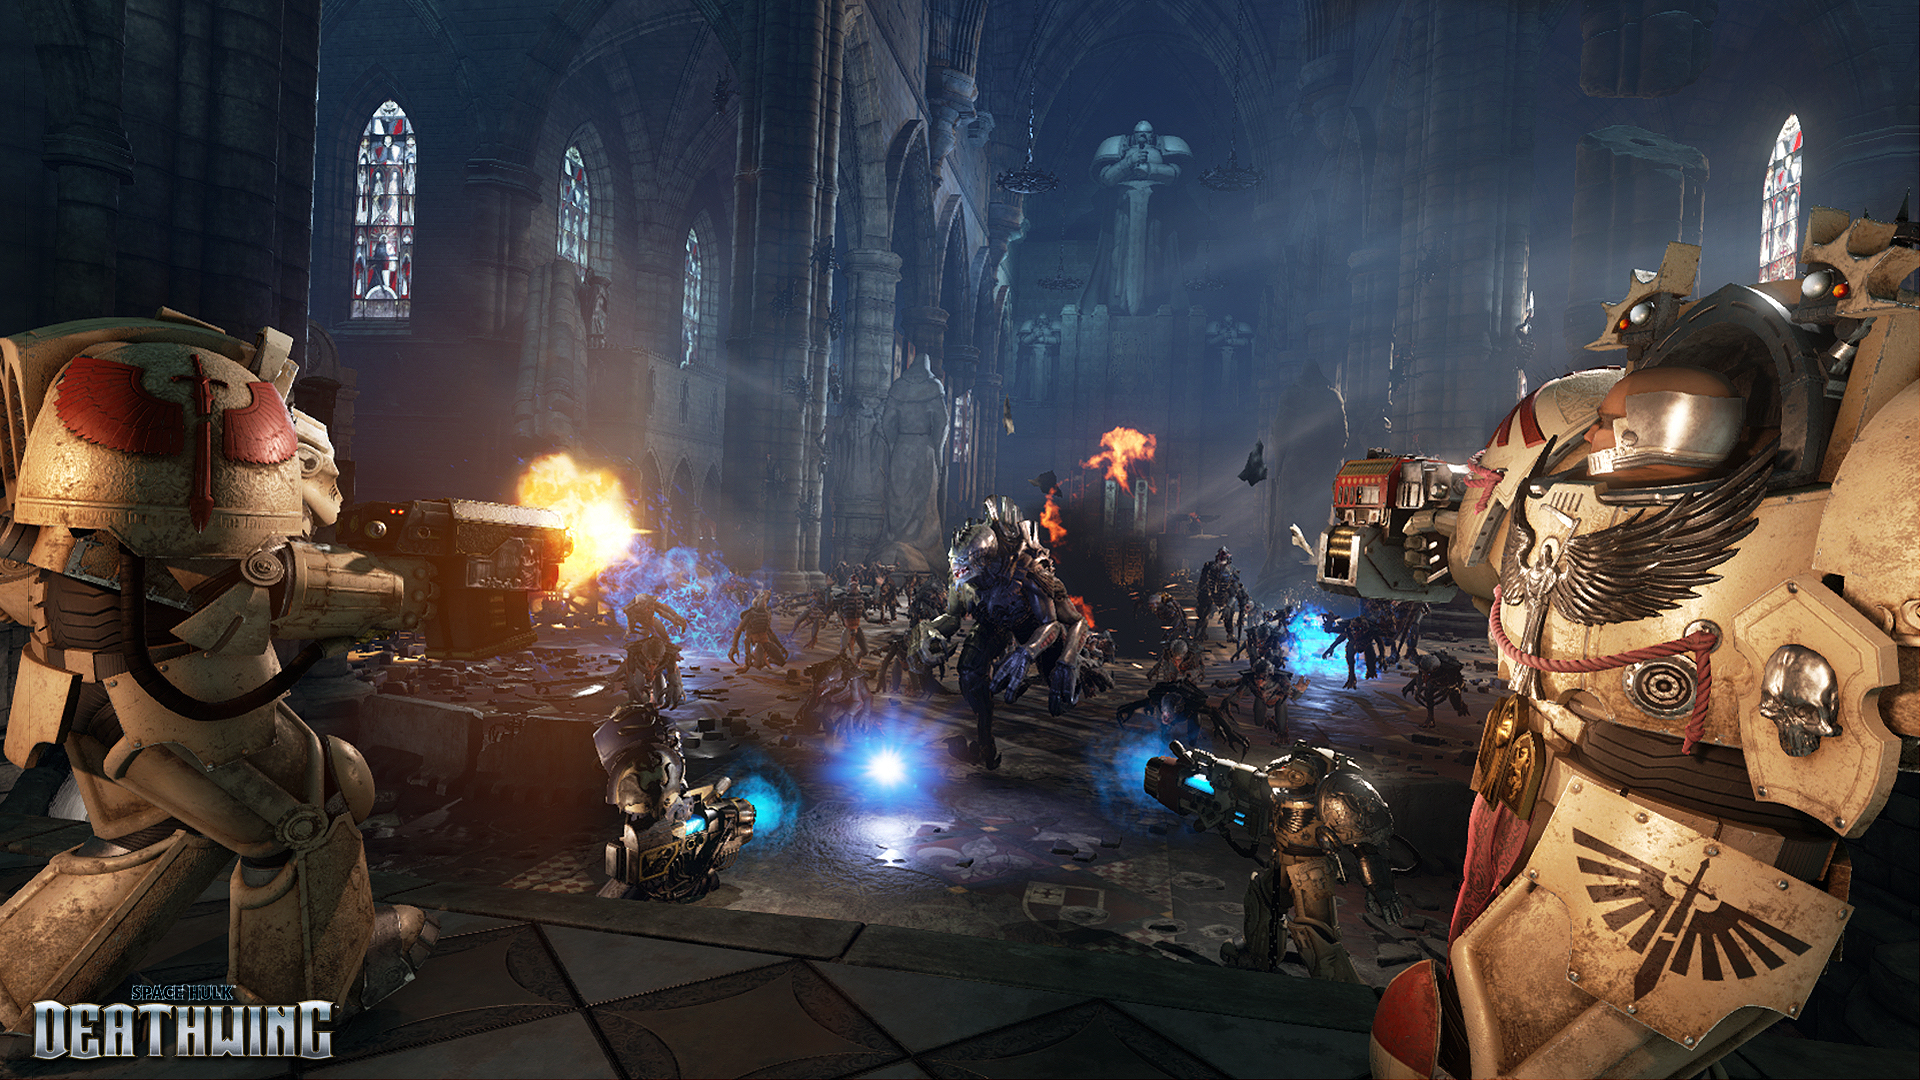 Media asset in full size related to 3dfxzone.it news item entitled as follows: 17 minuti di gameplay in single-player dello shooterSpace Hulk: Deathwing | Image Name: news25285_Space-Hulk-Deathwing-Screenshot_7.jpg